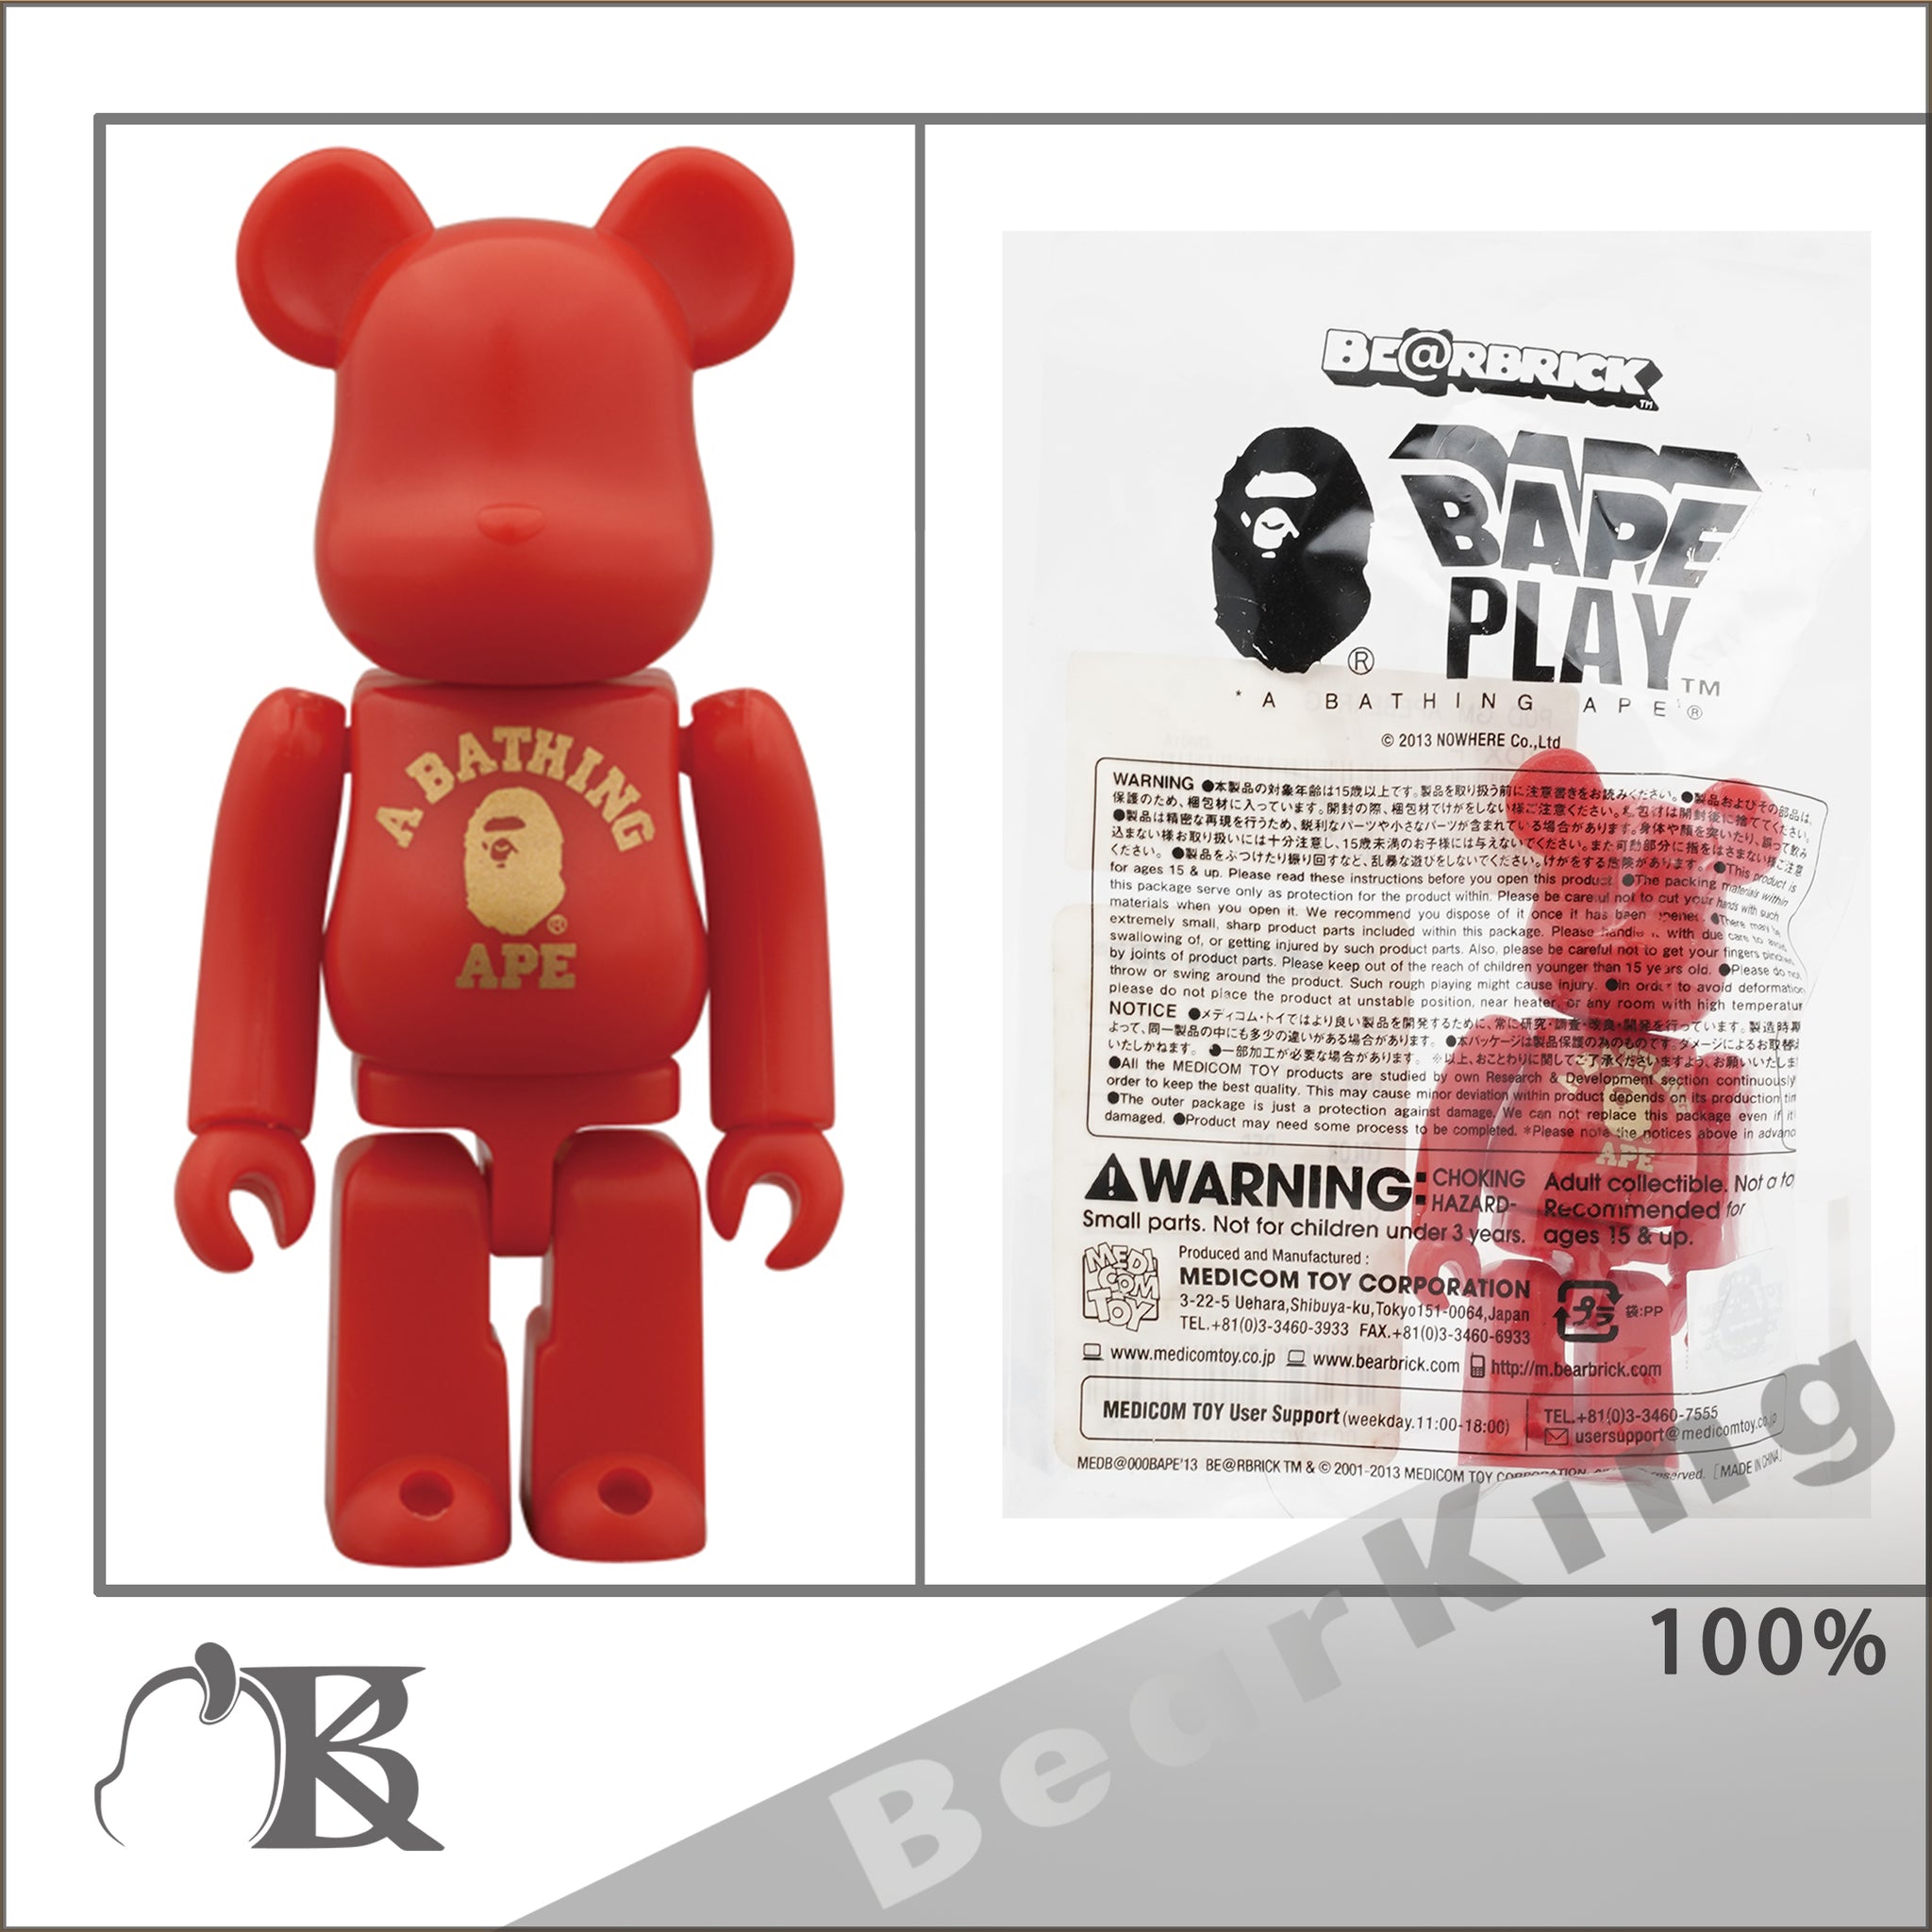 BE＠RBRICK BAPE(R) 100% RED 限量 紅色 2013 NEW YEAR CAMPAIGN